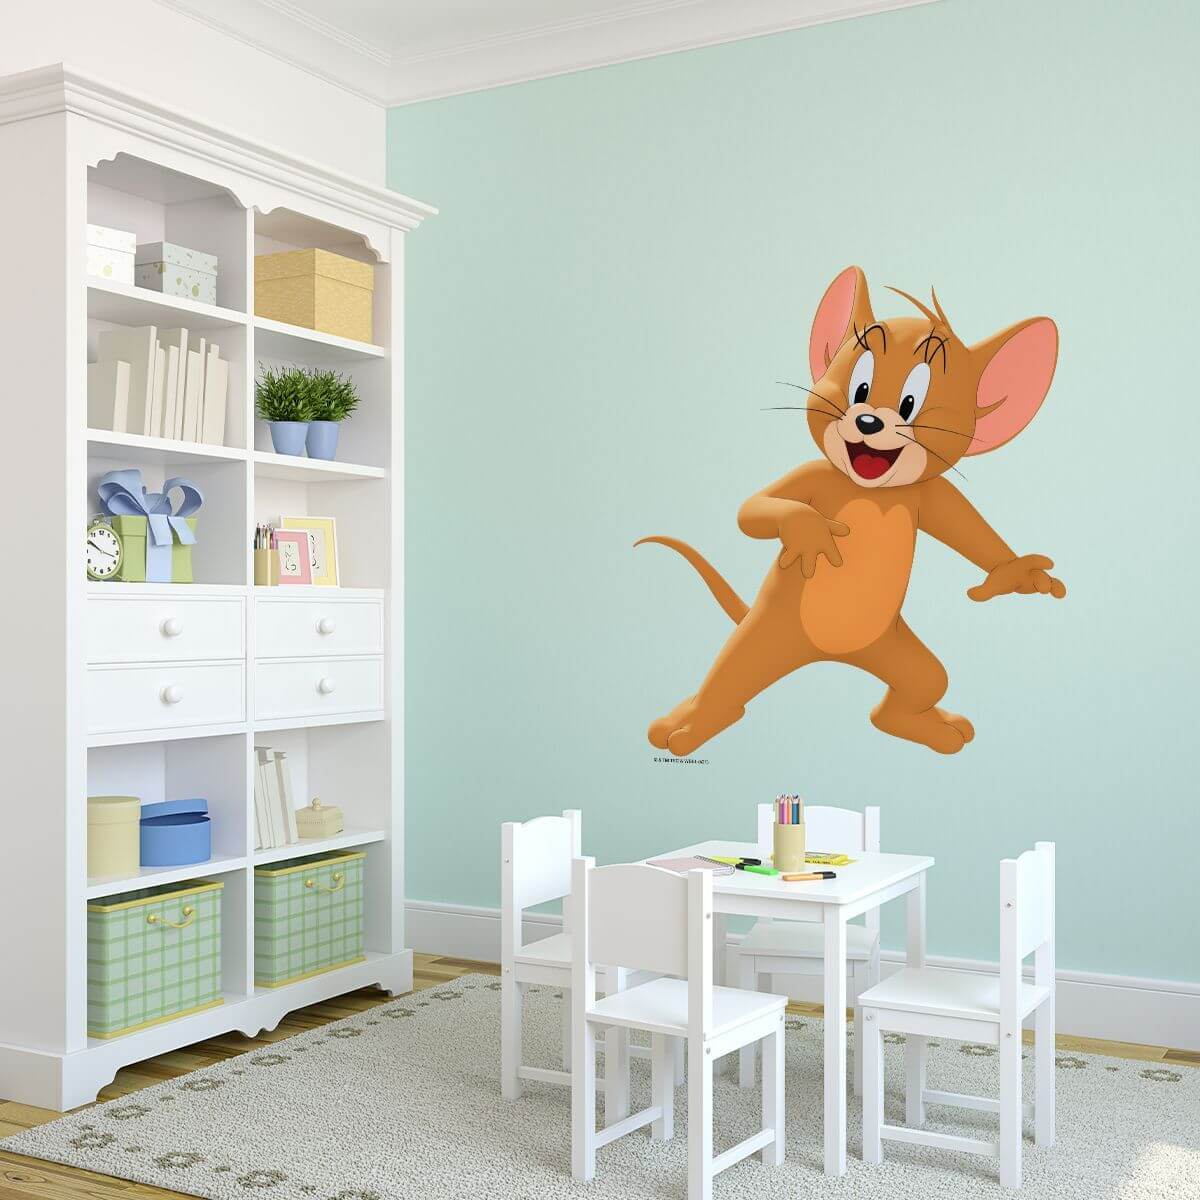 Kismet Decals Tom & Jerry: Jerry Ready for Action Licensed Wall Sticker - Easy DIY Home & Room Decor Cartoon Wall Art - Kismet Decals